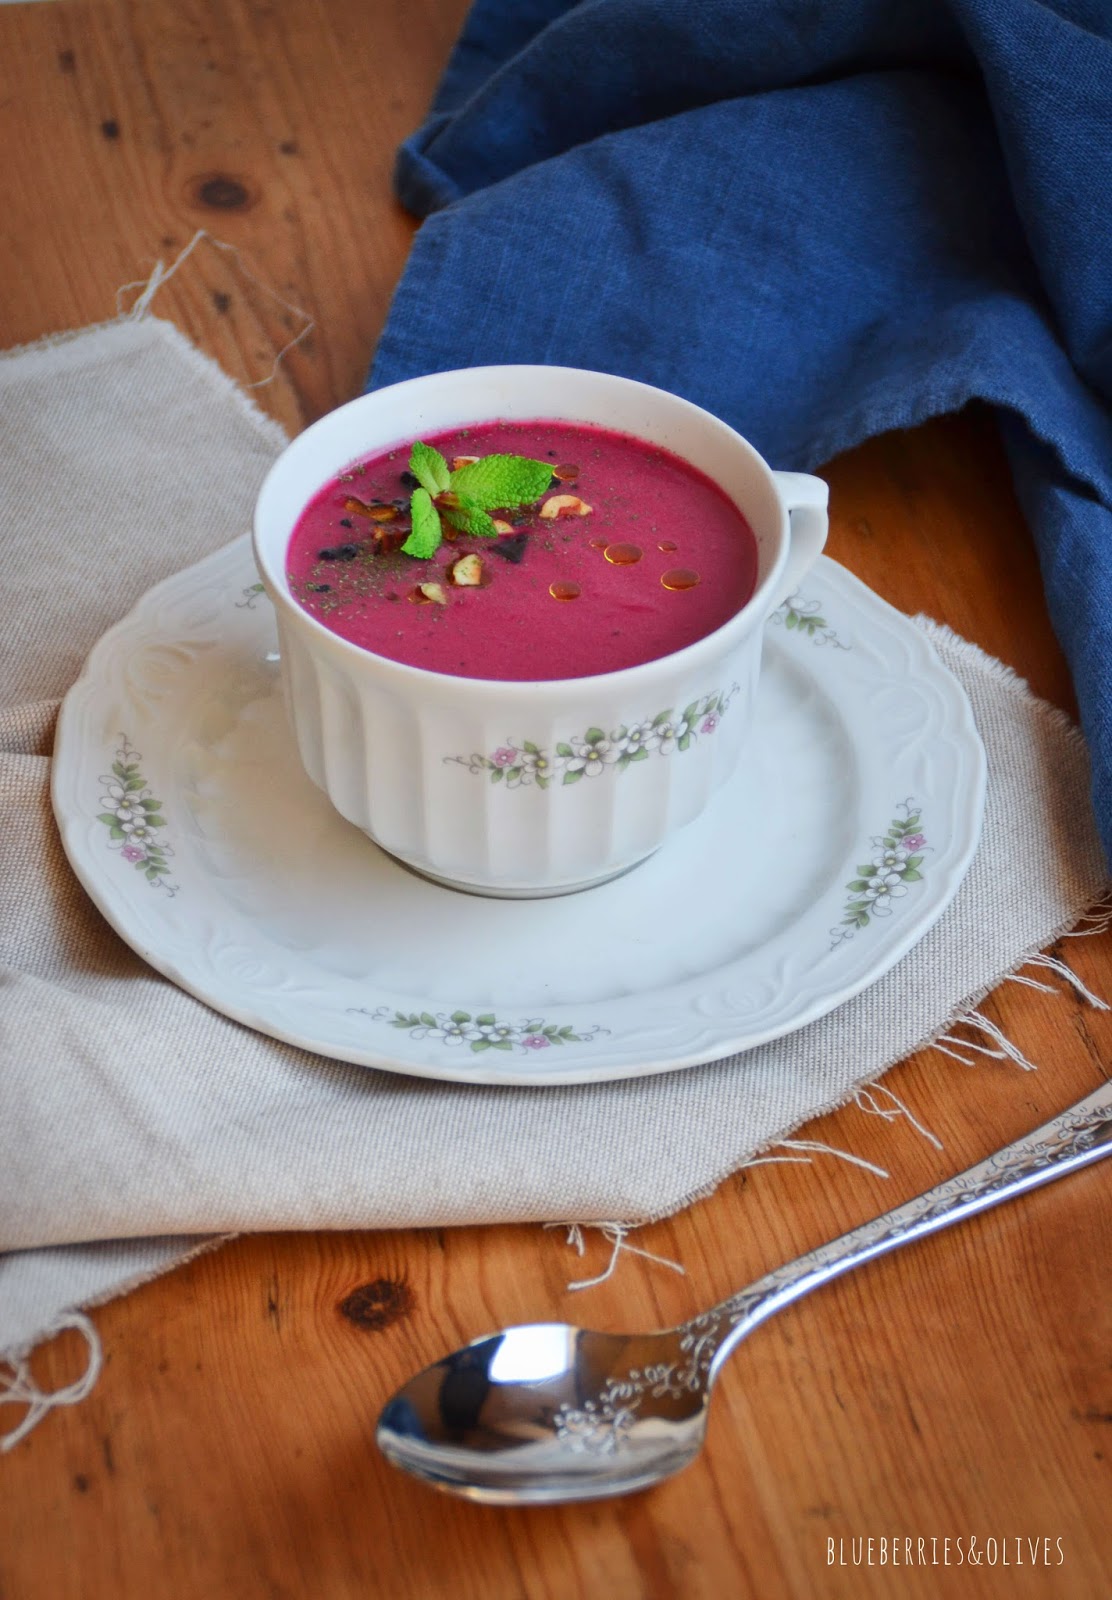 LEEK, FENNEL AND BEETROOT COLD SOUP 